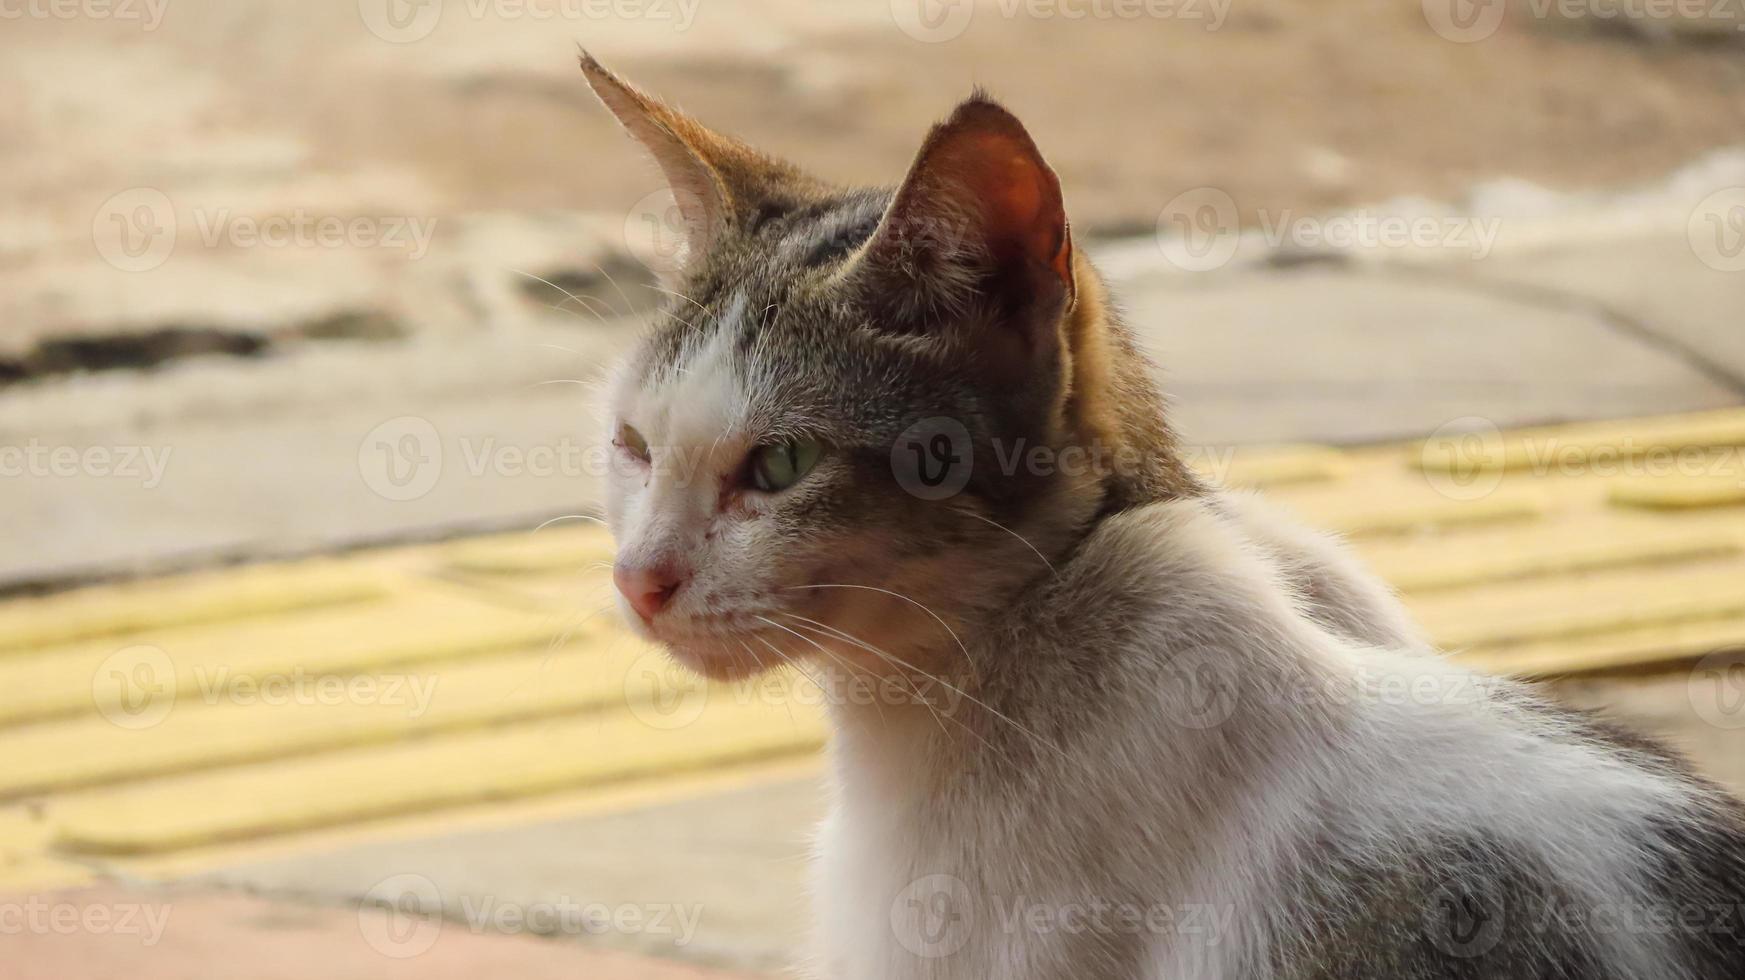 The Cyprus cat is one of the local breeds of domestic cats believed to have originated in Egypt or Palestine photo